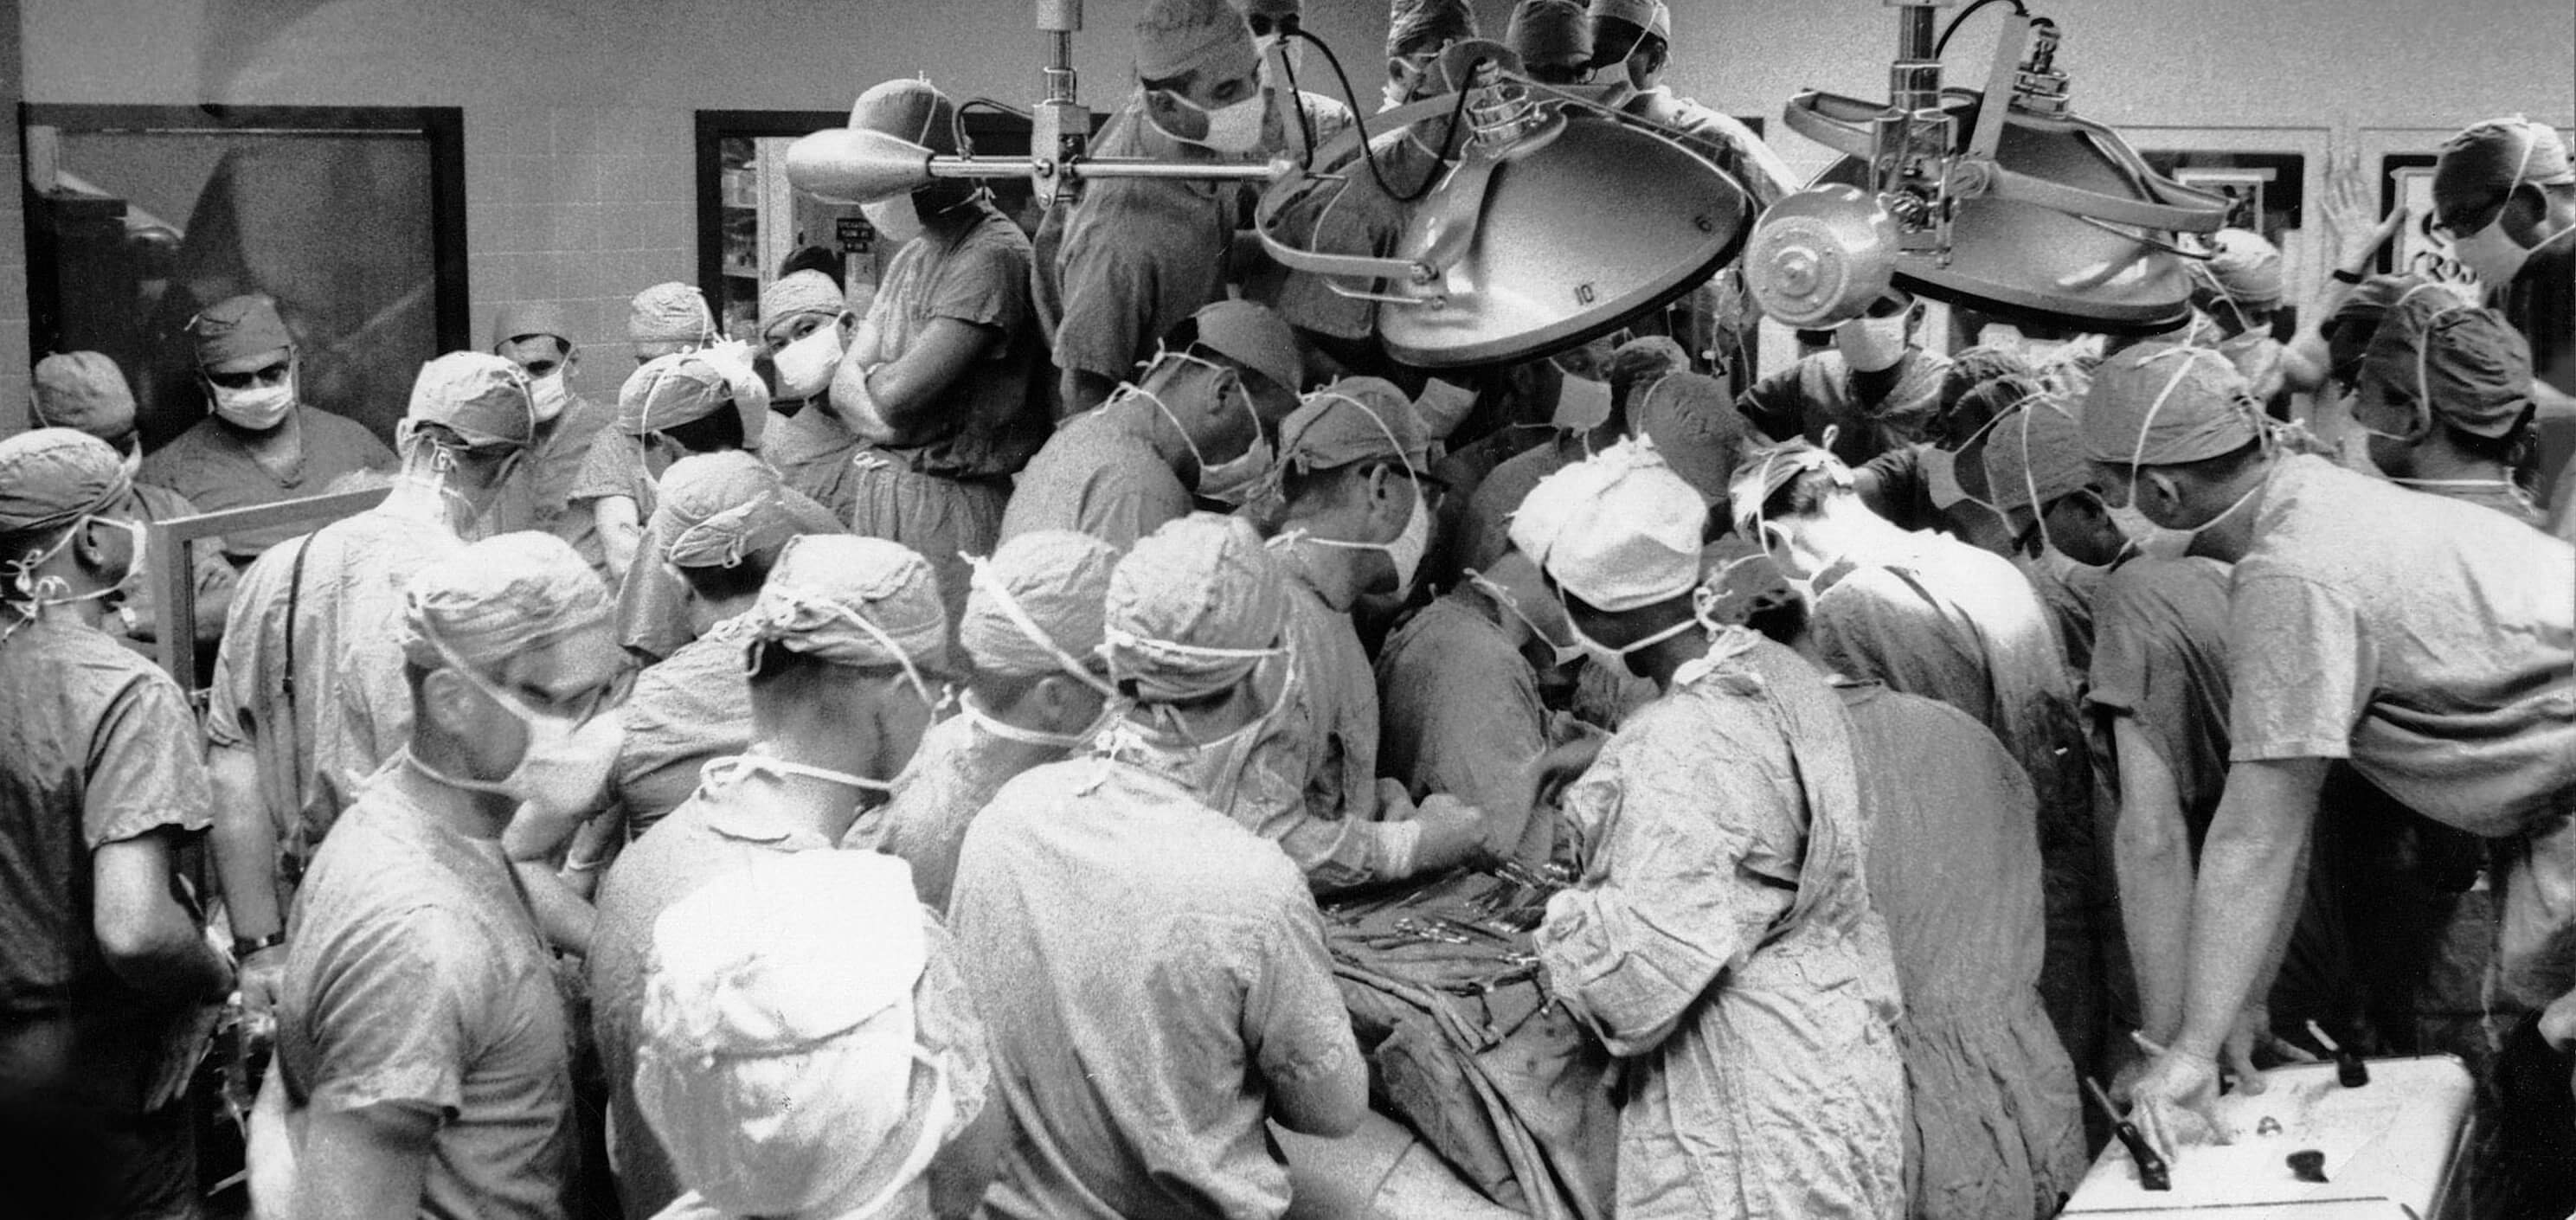 Visiting surgeons from around the world gather to observe a procedure by Cooley’s team in the early days of the Texas Heart Institute. (Credit: Texas Heart Institute)